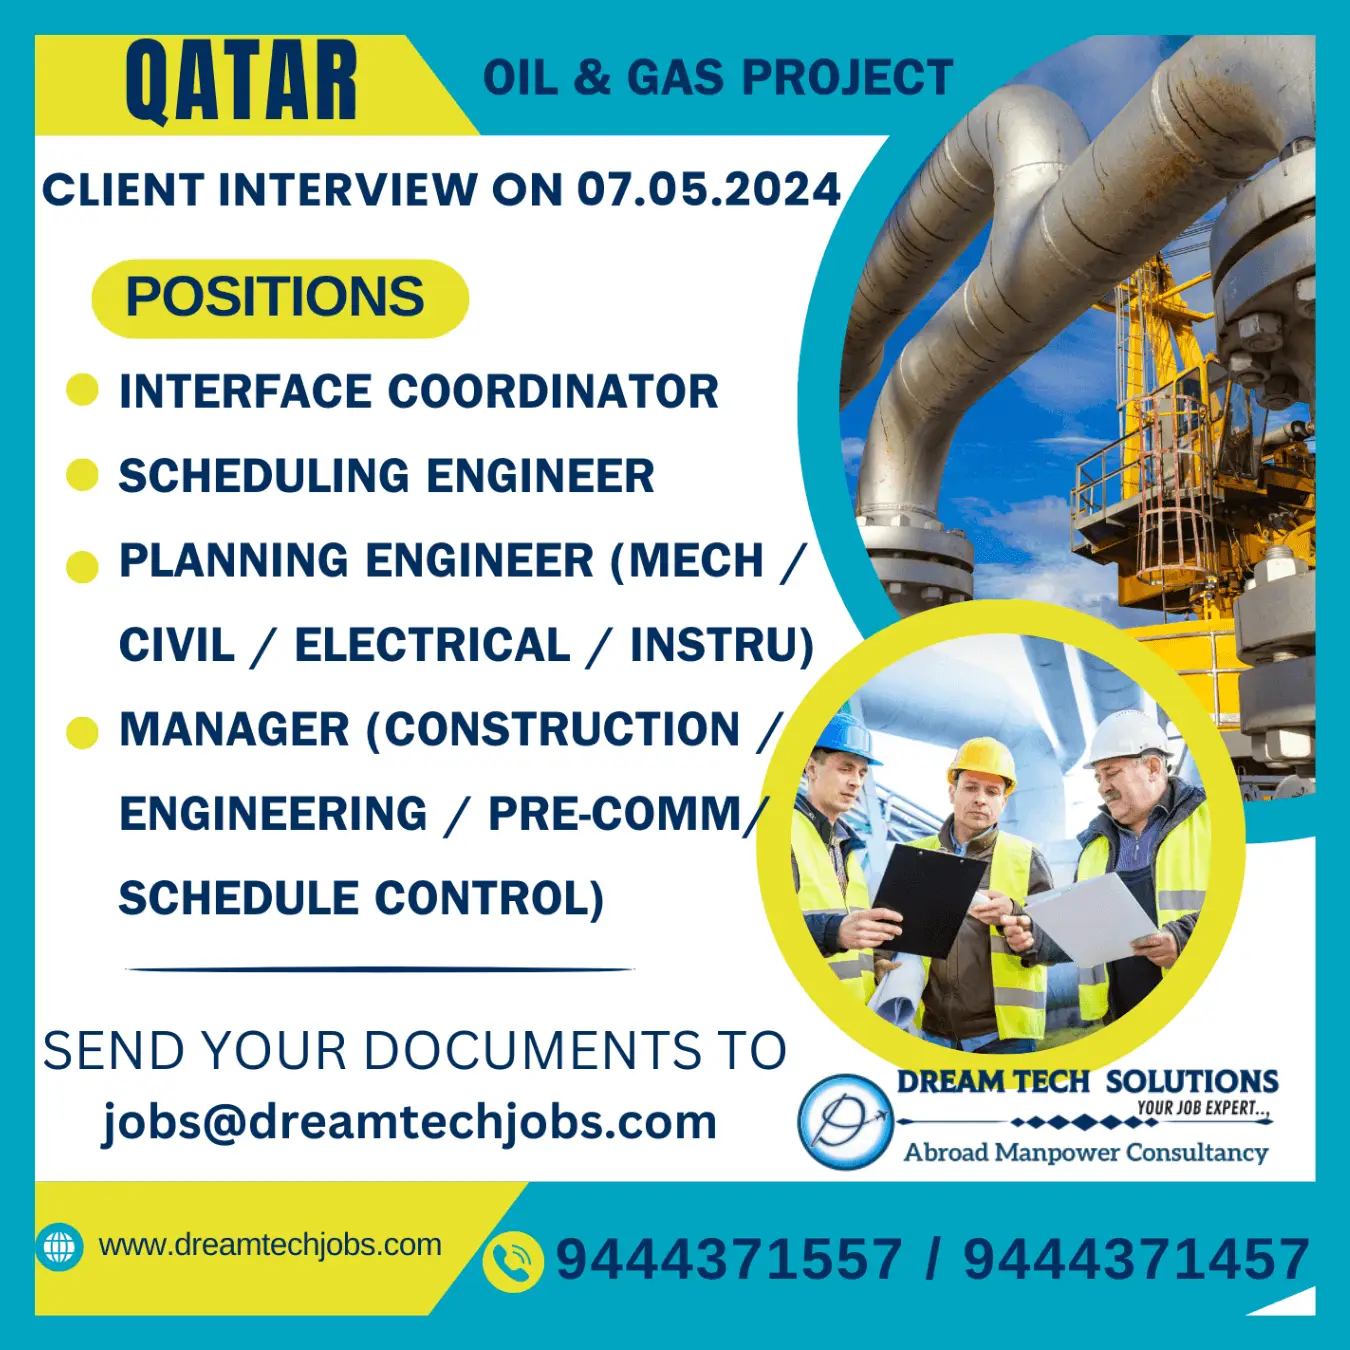 oil and gas jobs in qatar 2024